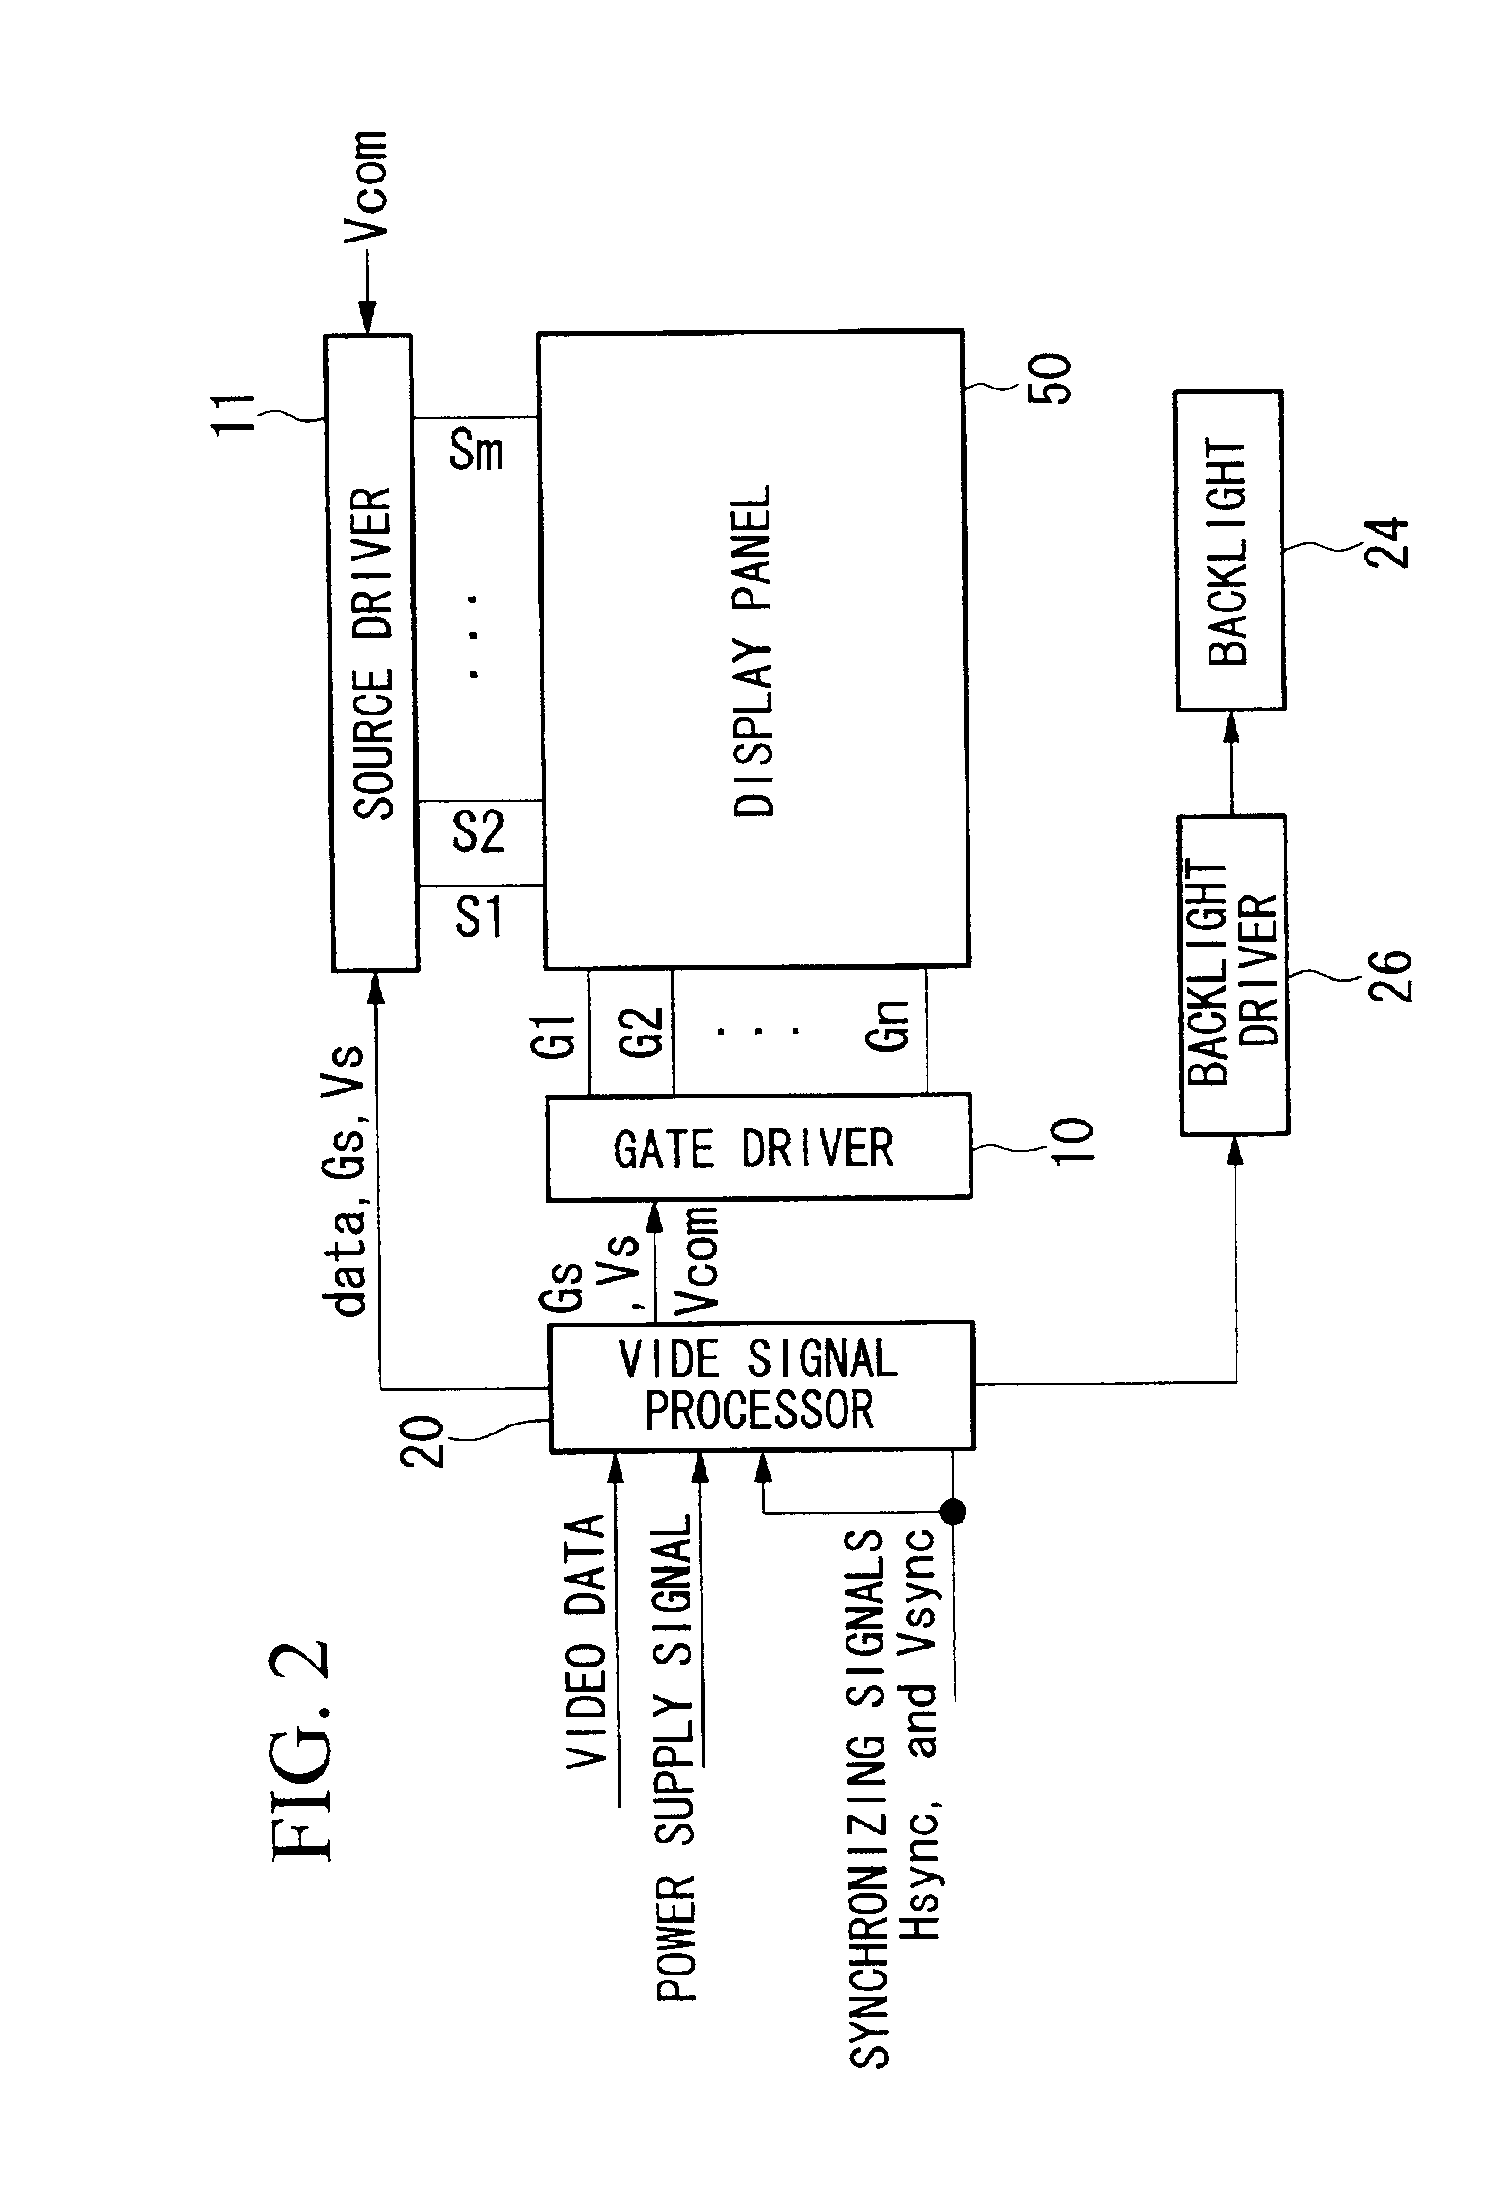 Liquid crystal display device for preventing and afterimage